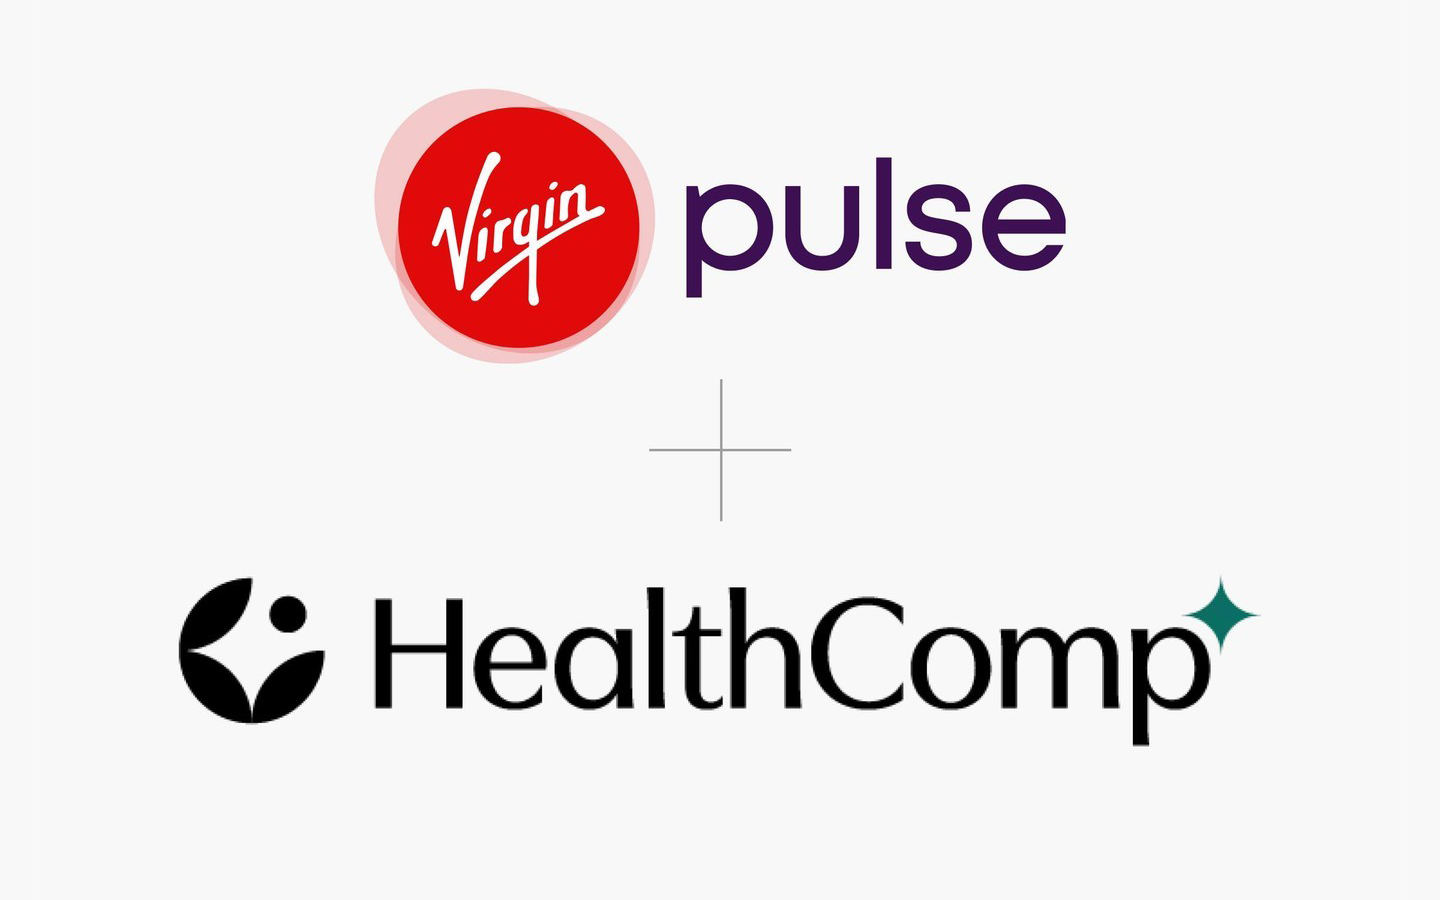 M&A: Virgin Pulse and HealthComp Merge in $3B Deal